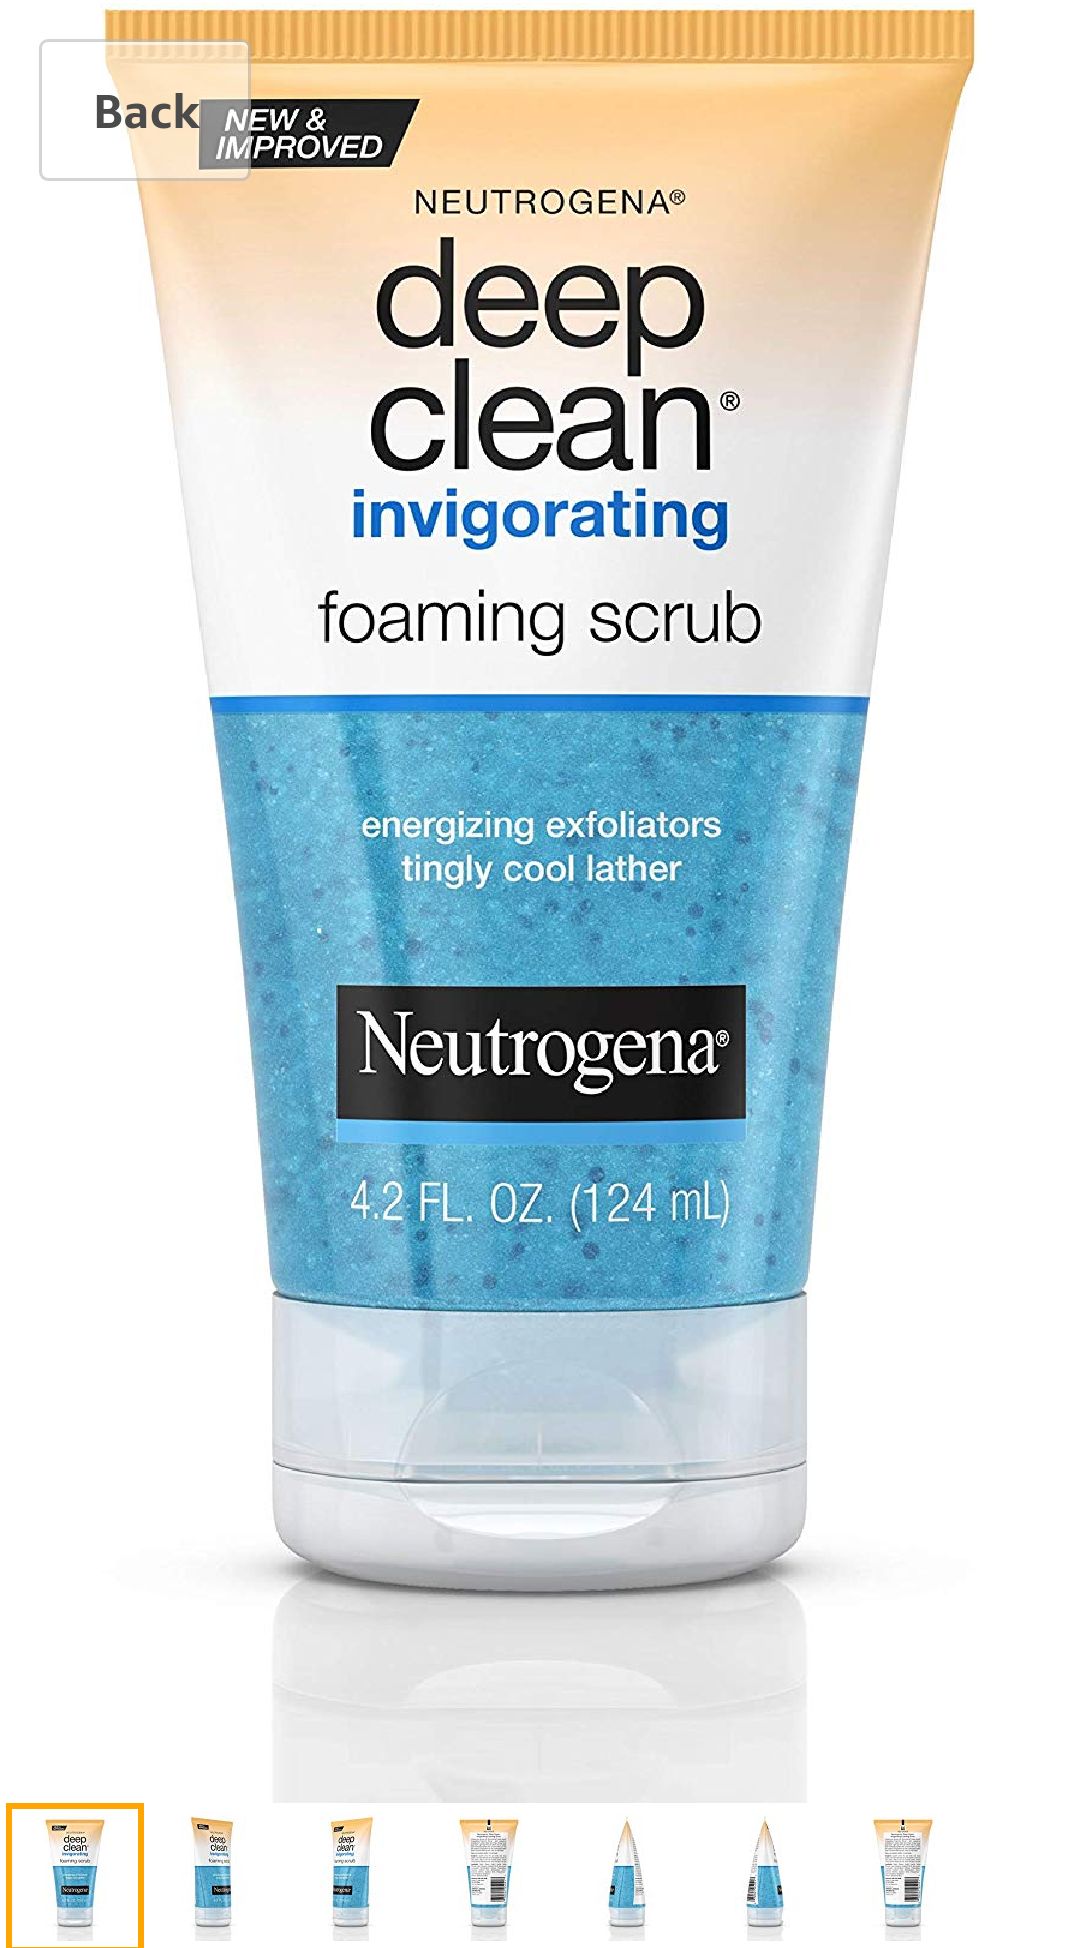 Amazon.com: Neutrogena Deep Clean Invigorating Foaming Face Scrub with Glycerin, Cooling & Exfoliating Face Wash to Remove Dirt, Oil & Makeup, 4.2 fl. oz: Beauty洗面奶